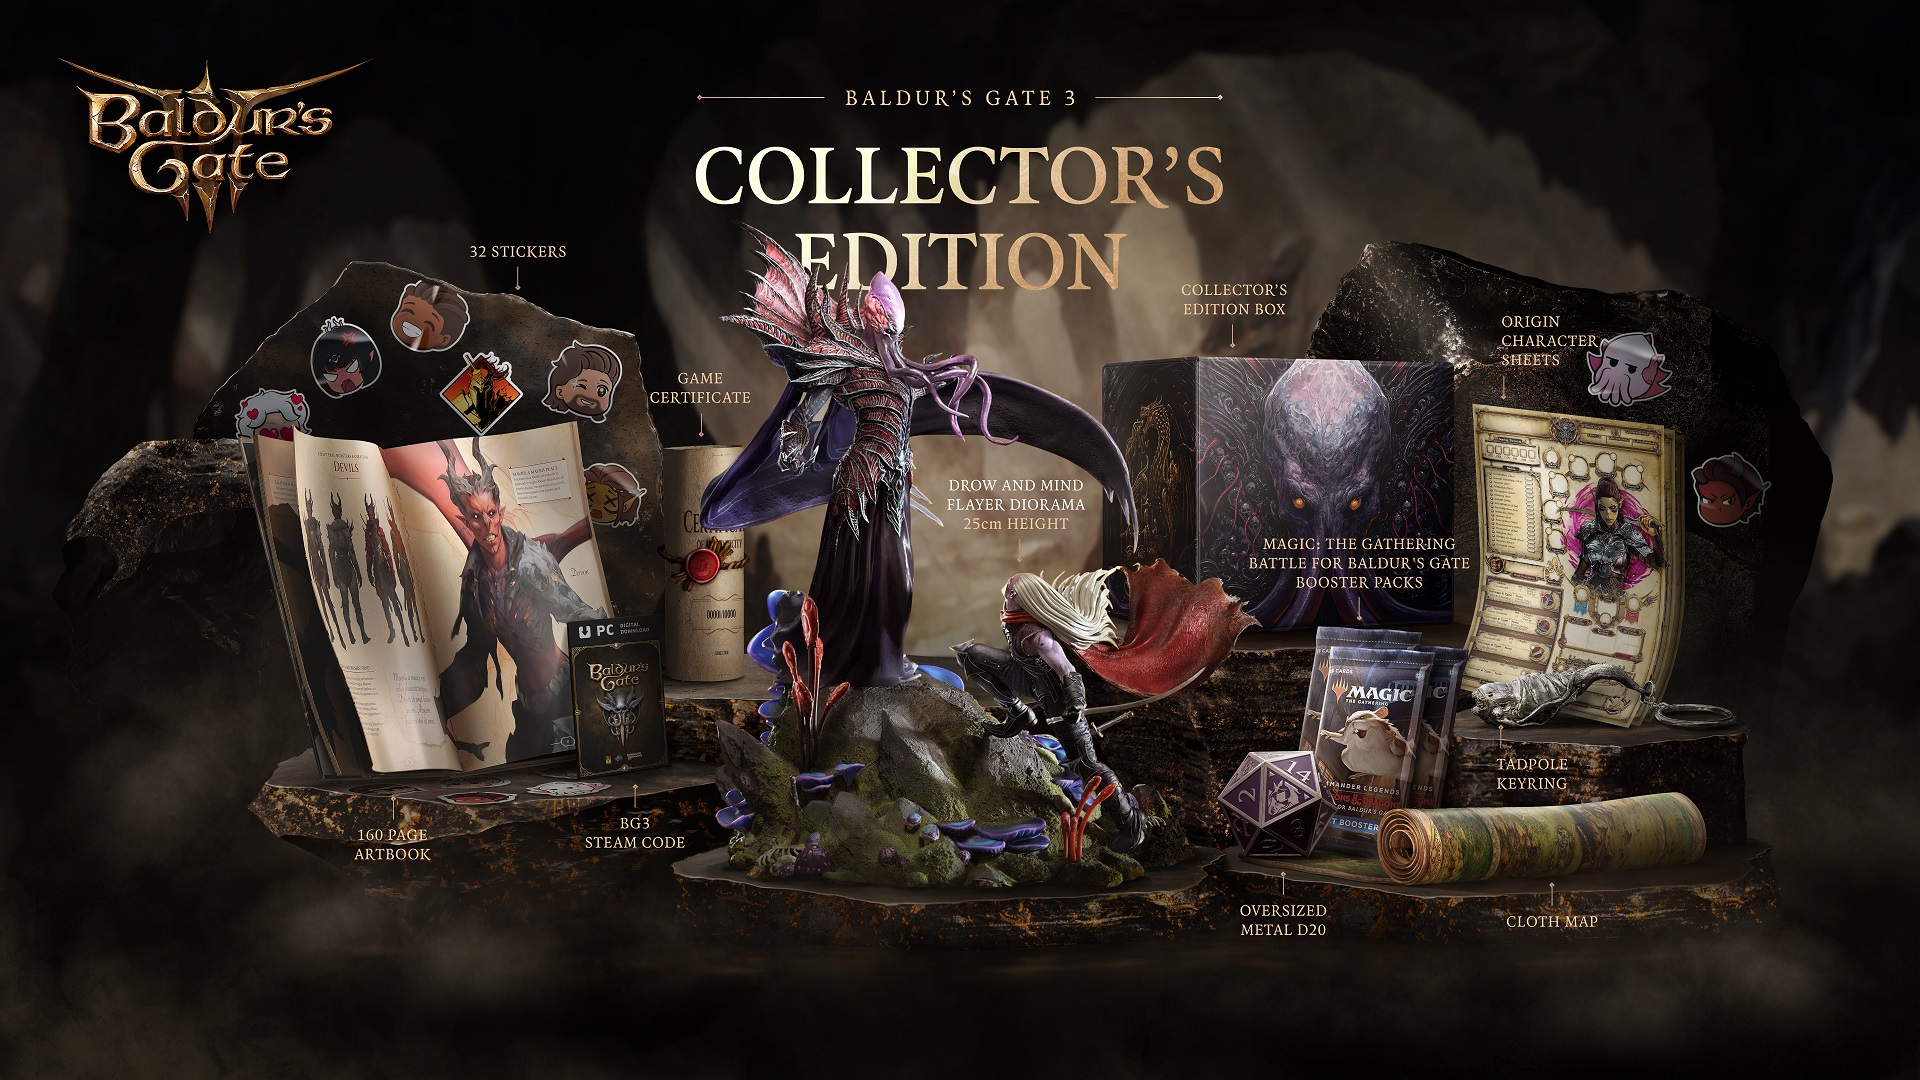 Official announcement by Maximum Games. Collector's edition